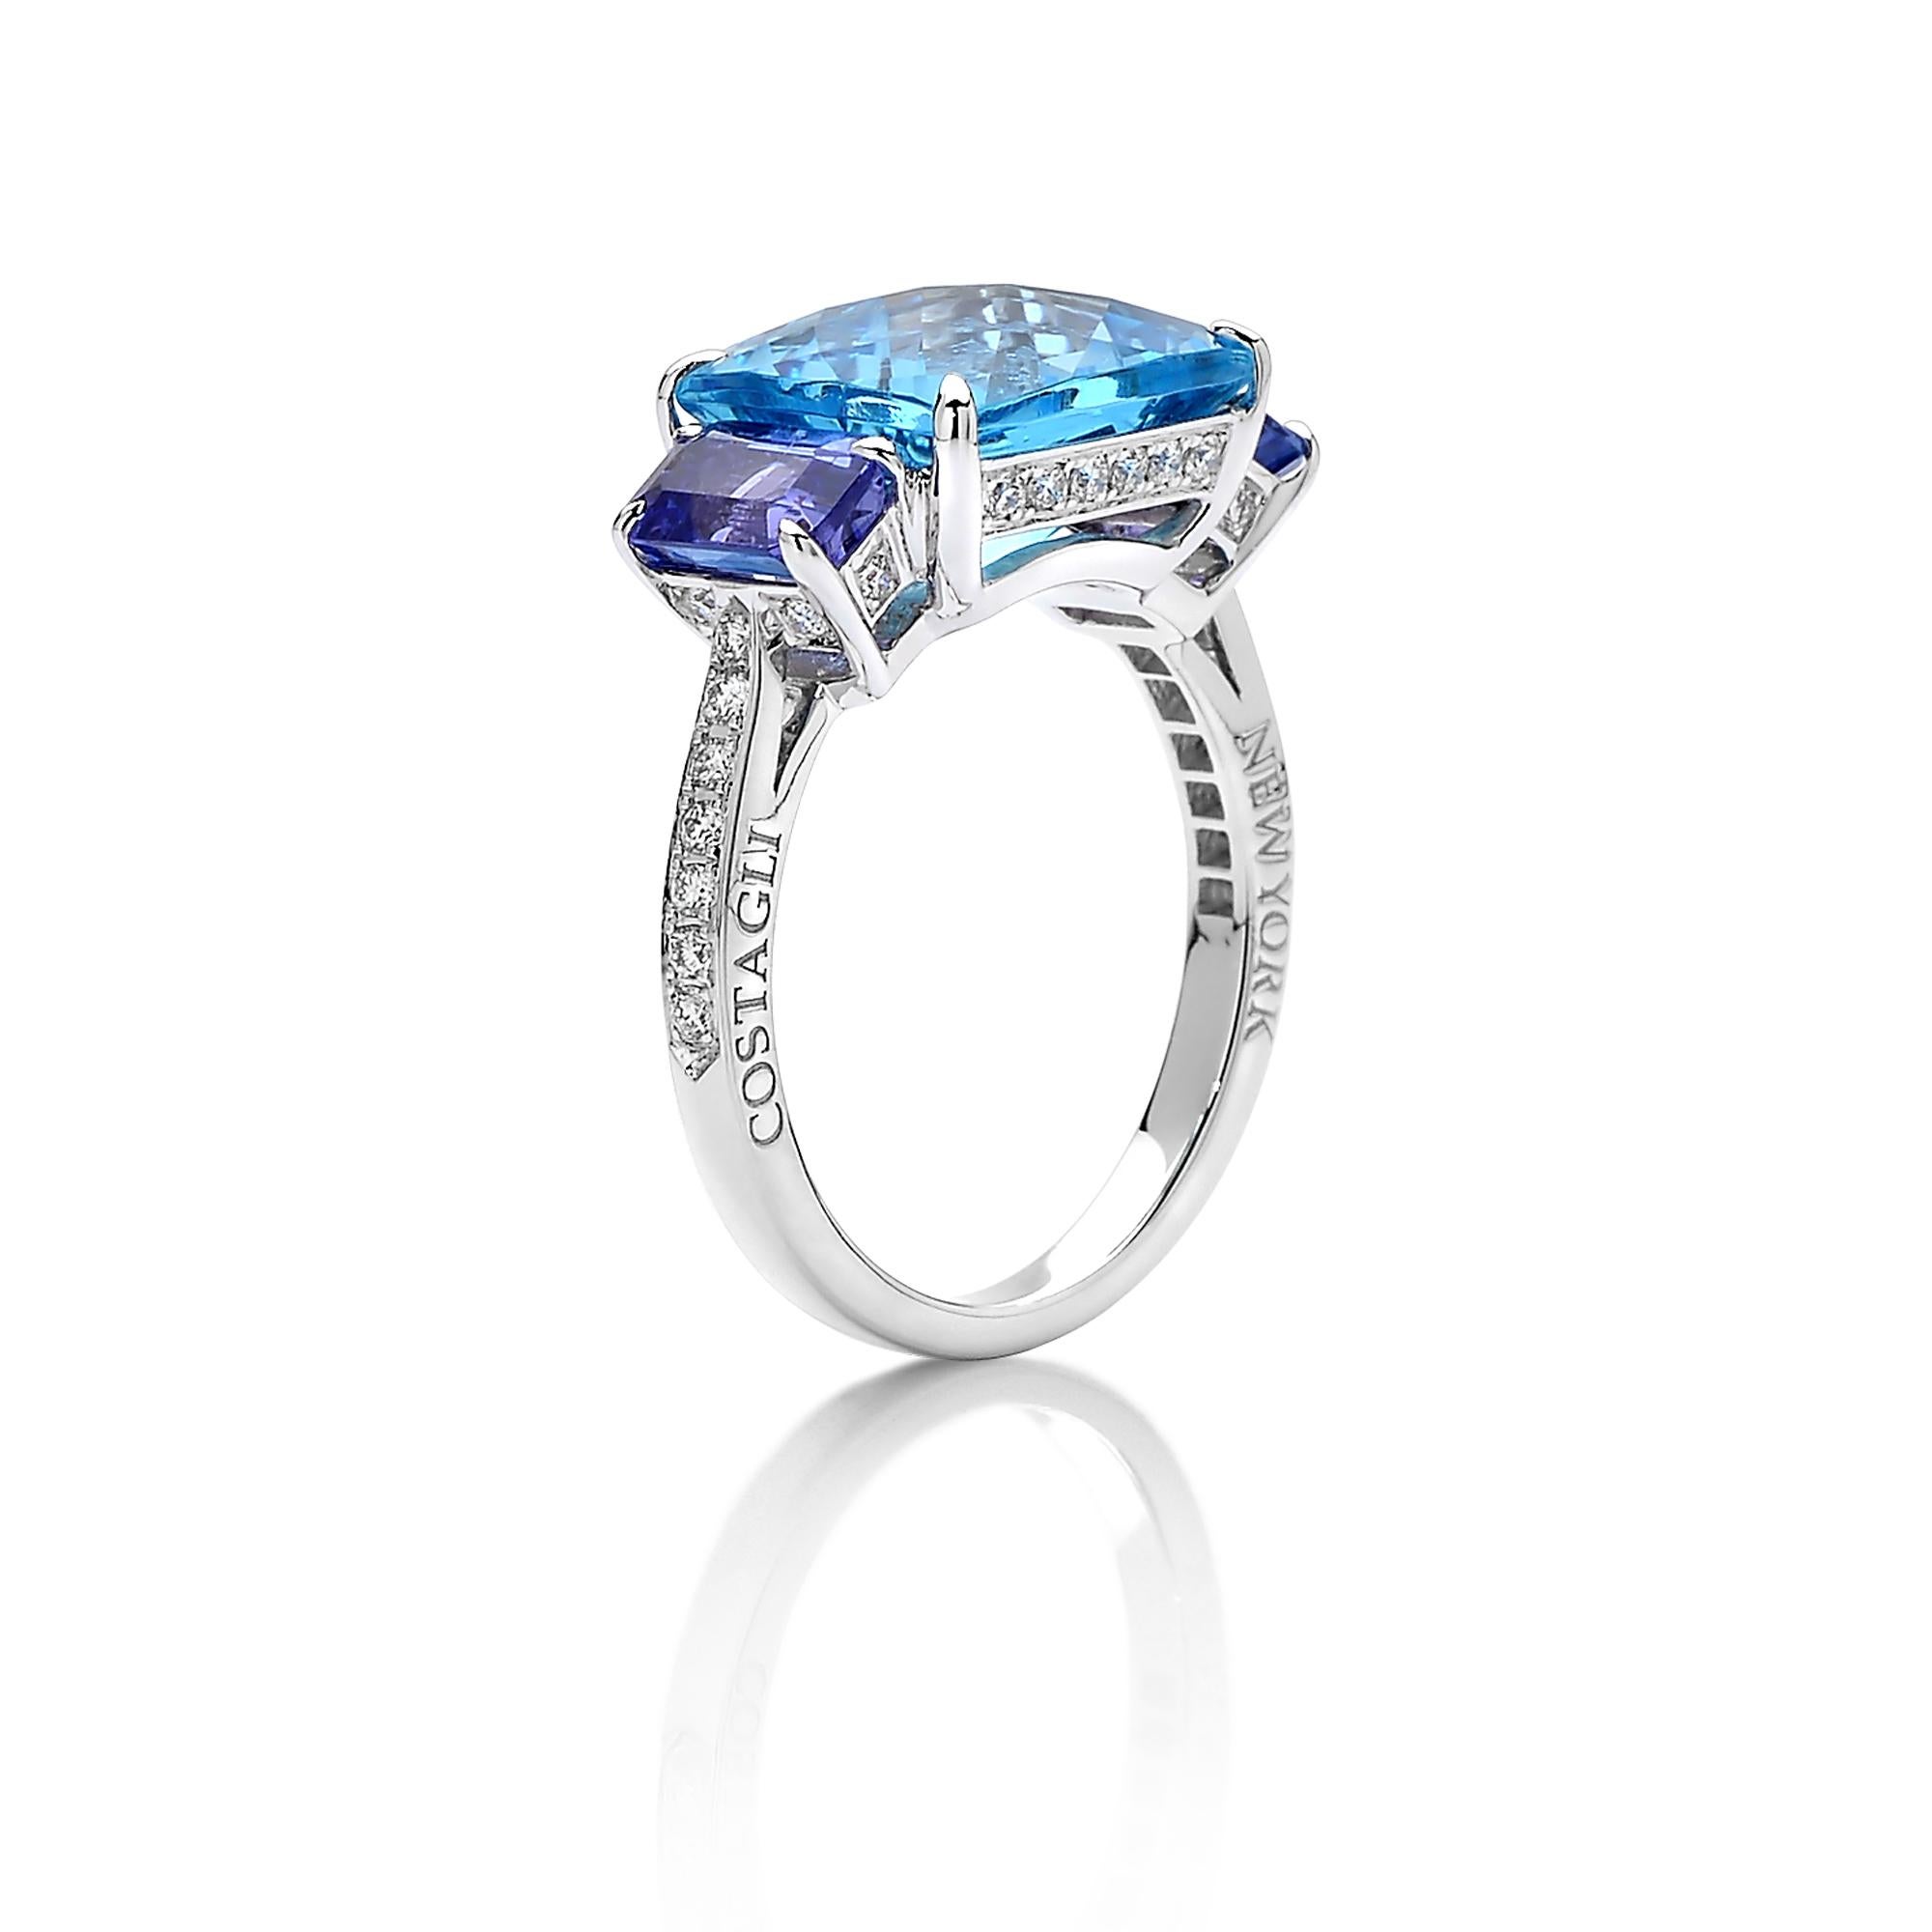 One-of-a-kind emerald-cut Swiss Blue Topaz ring with trillion-cut tanzanite side stones set in 18 karat white gold and pave-set round, brilliant diamond detailing. 

A classic ring silhouette paired with the unique color combination makes this jewel